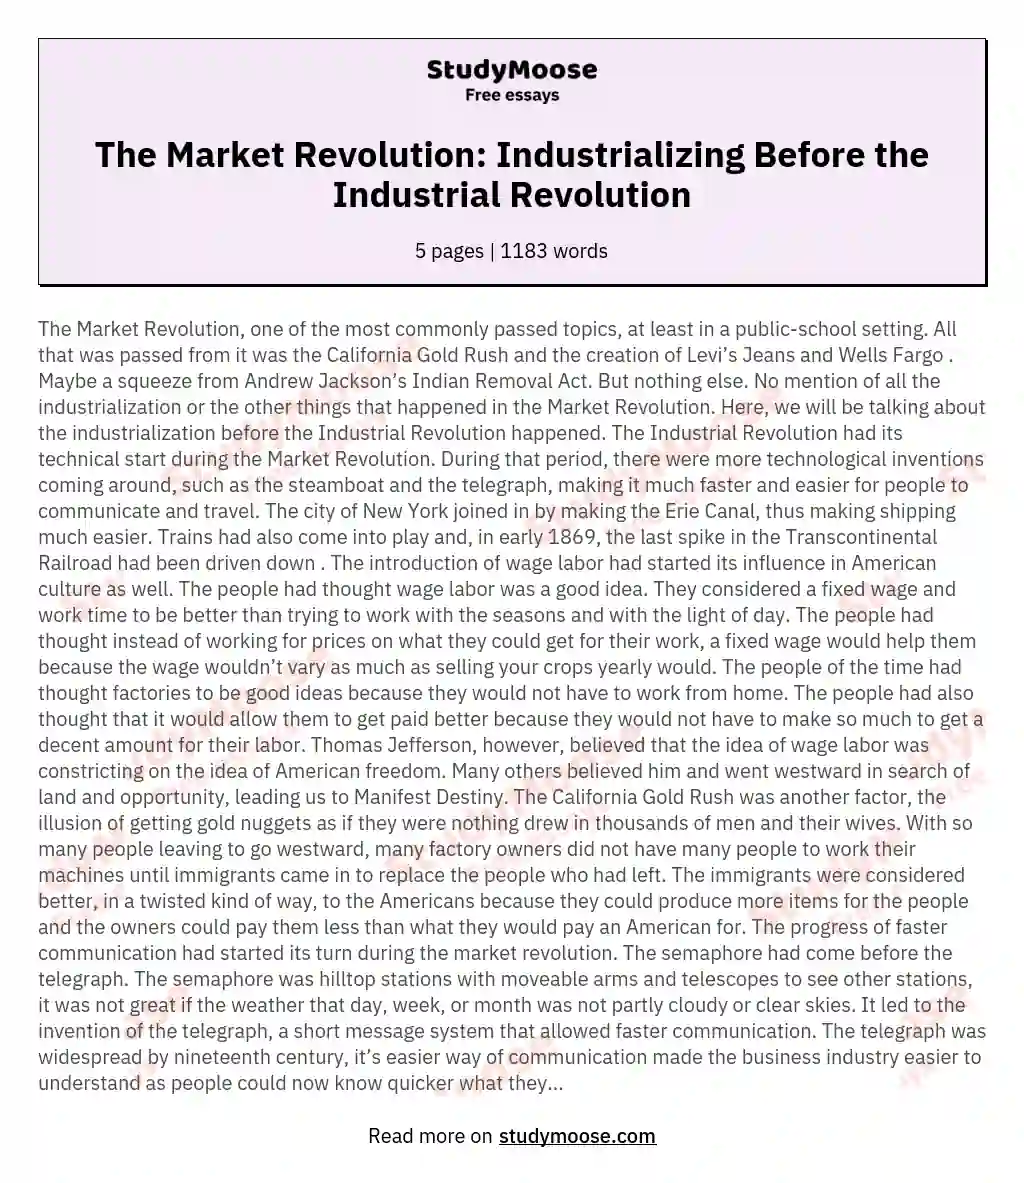 The Market Revolution: Industrializing Before the Industrial Revolution